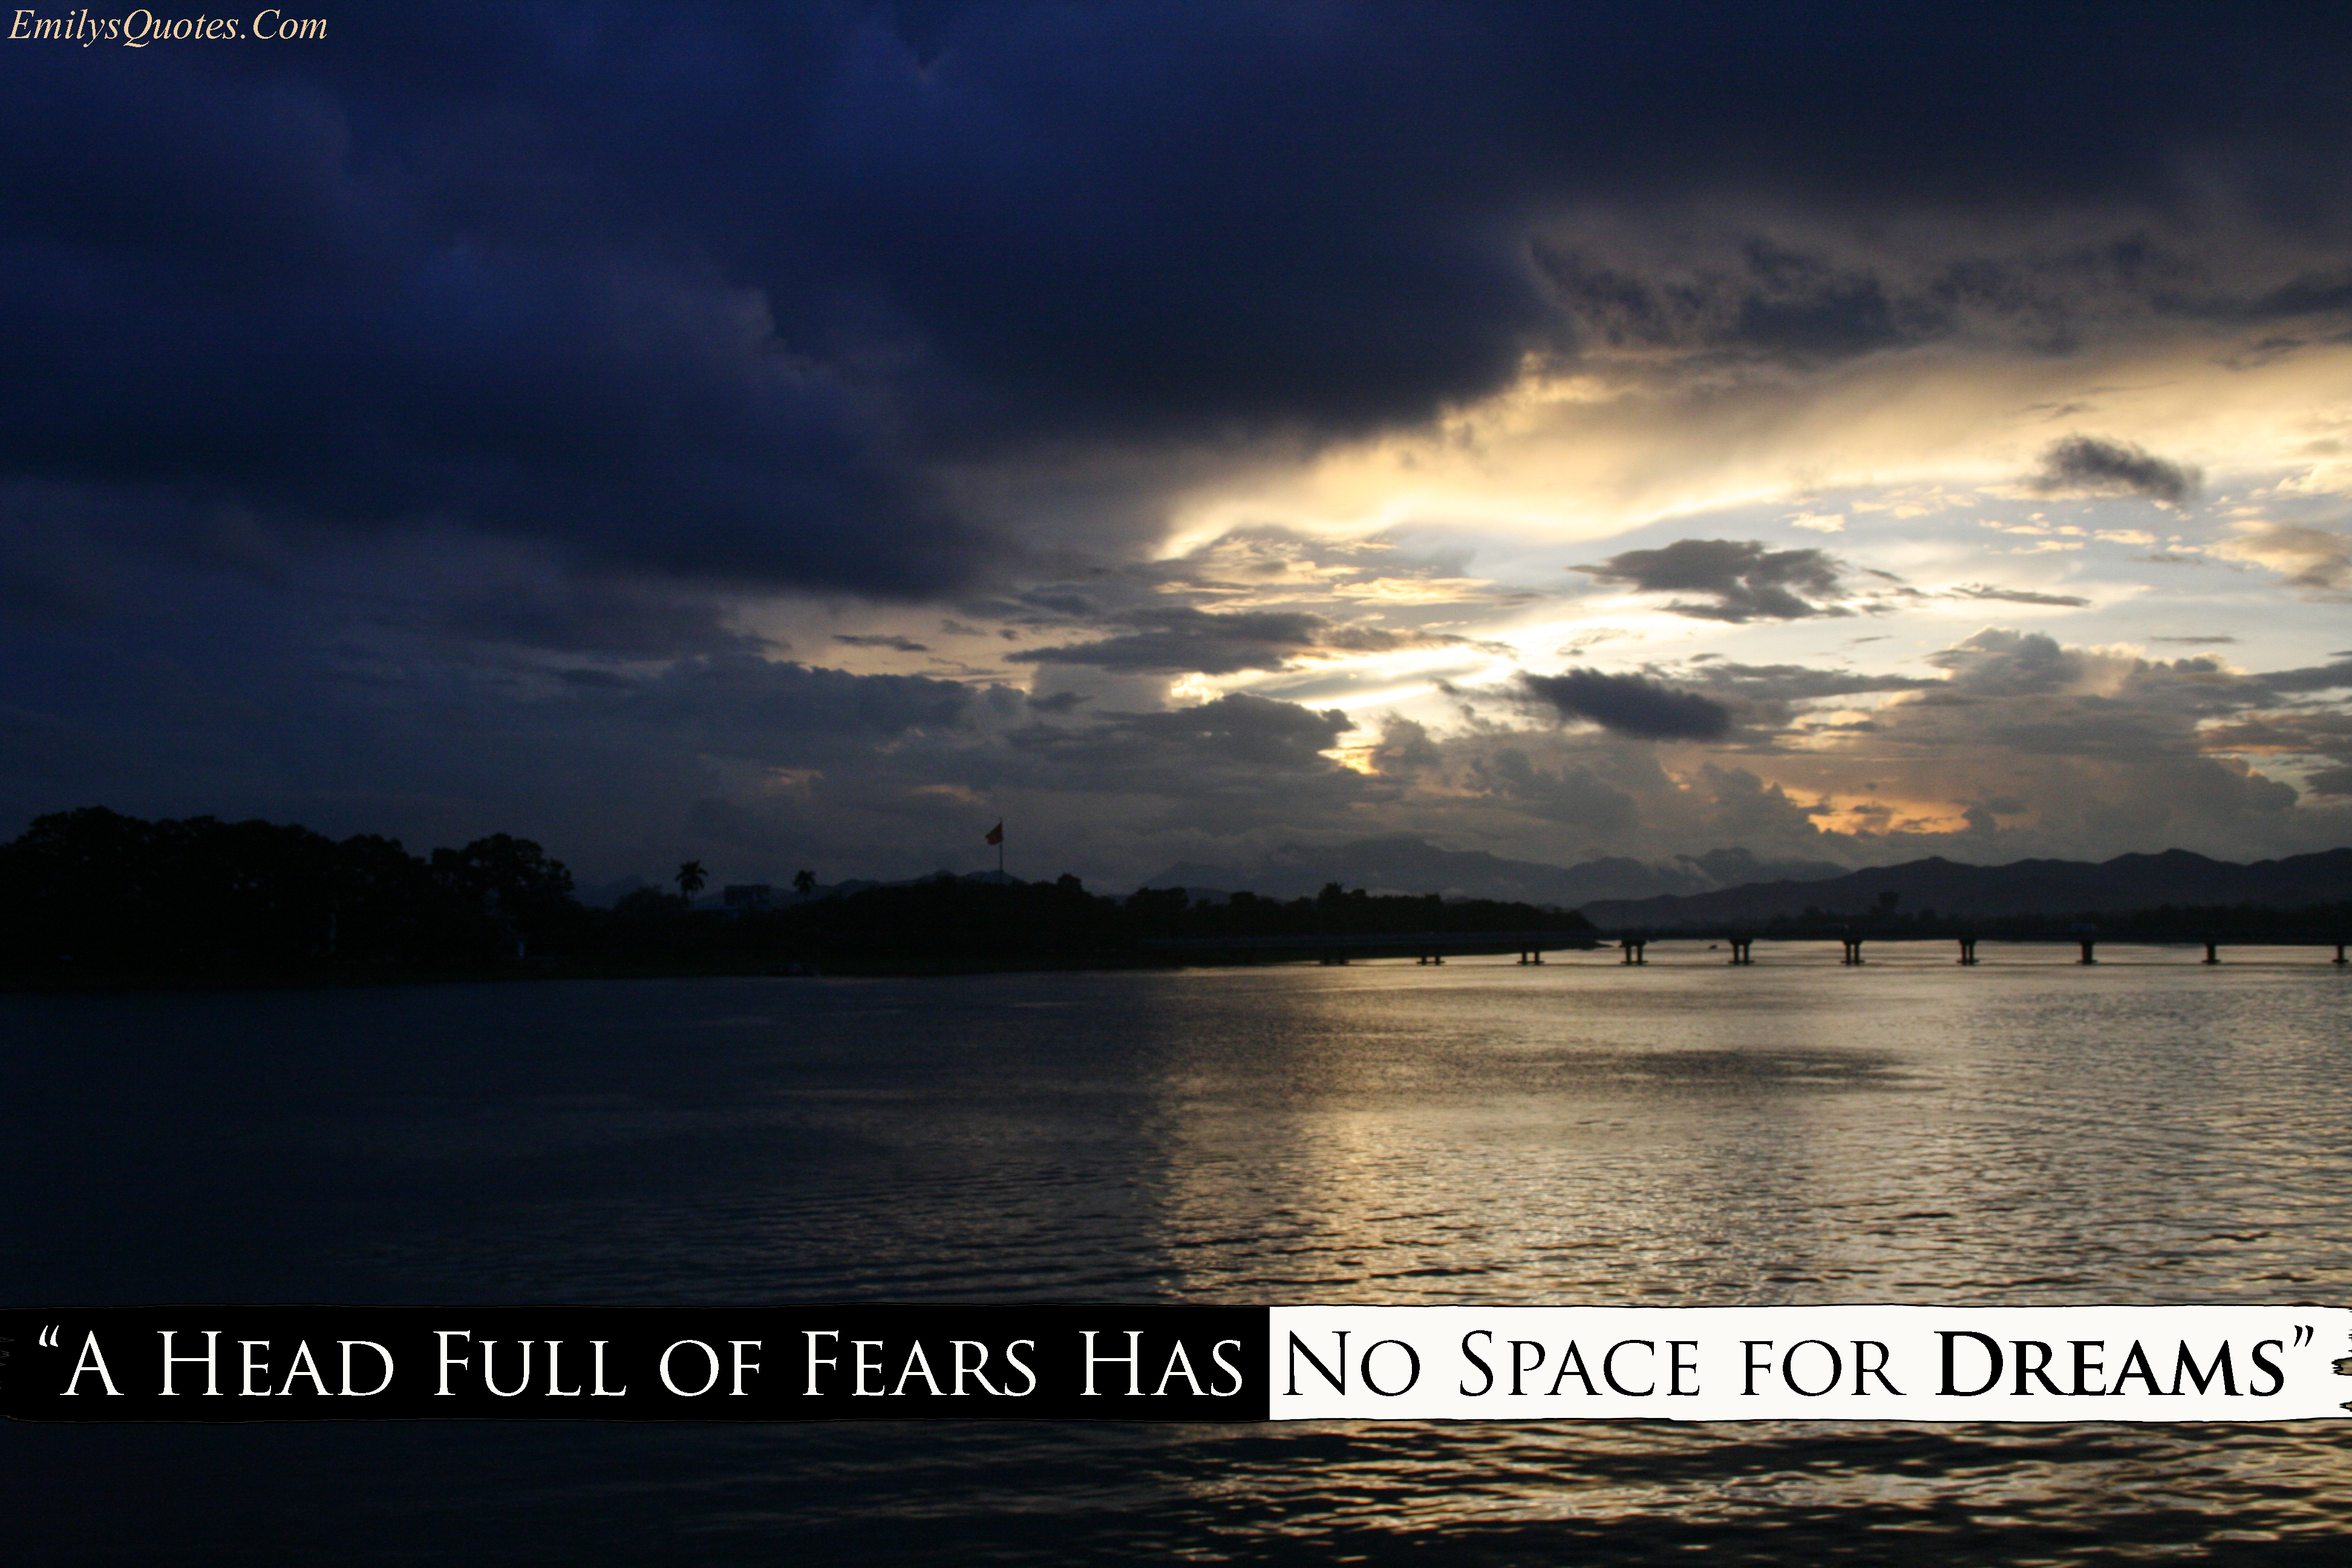 A Head Full of Fears Has No Space for Dreams